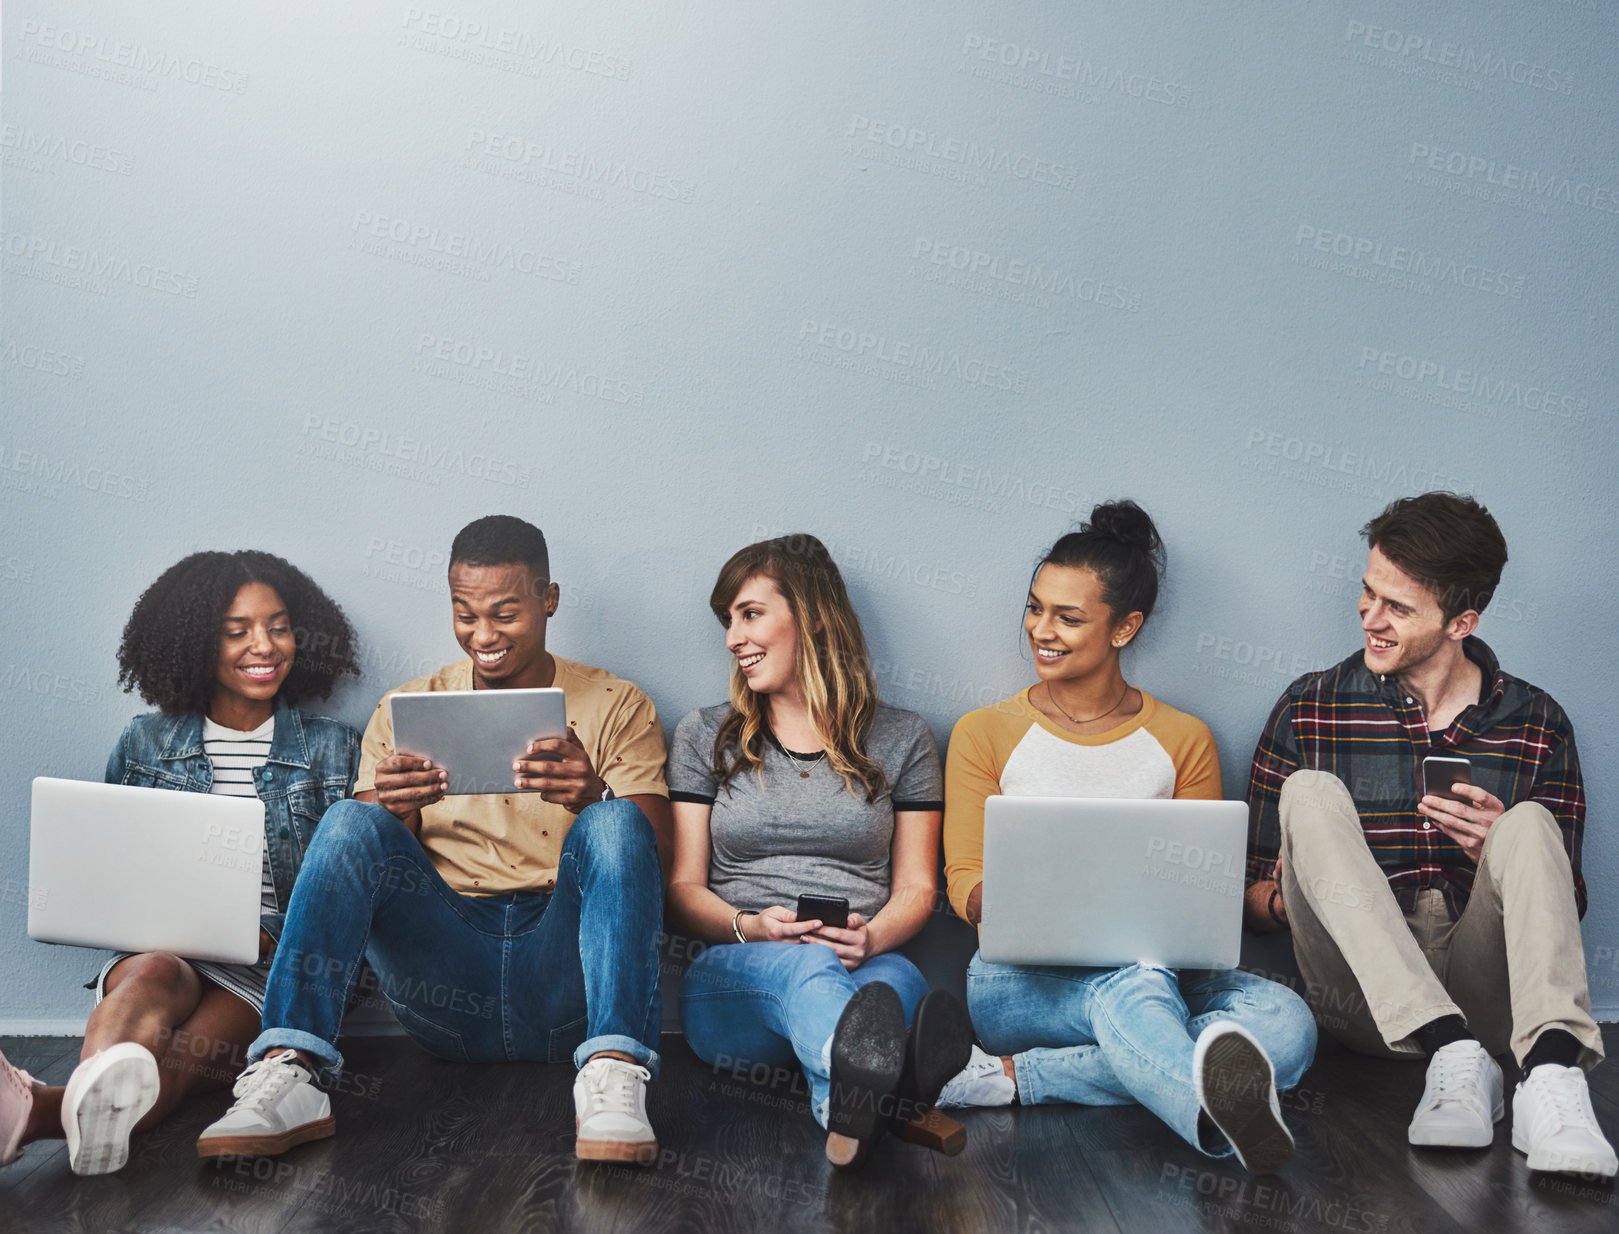 Buy stock photo Studio shot of a group of young people using wireless technology against a gray background